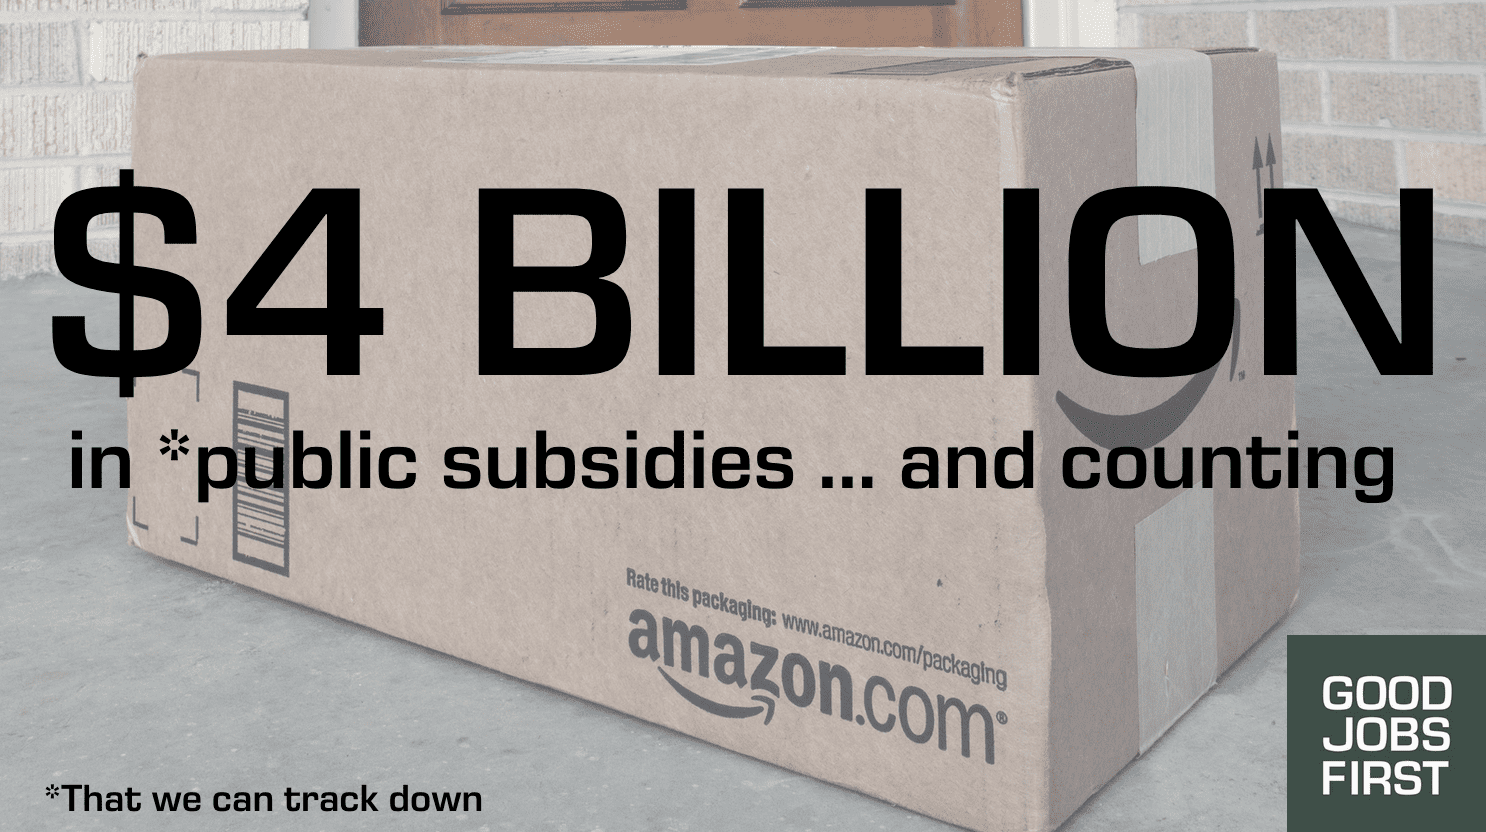 Photo of Amazon cardbox box with words "$4 Billion in public subsidies...and counting" and later at bottom it says "That we know of." 